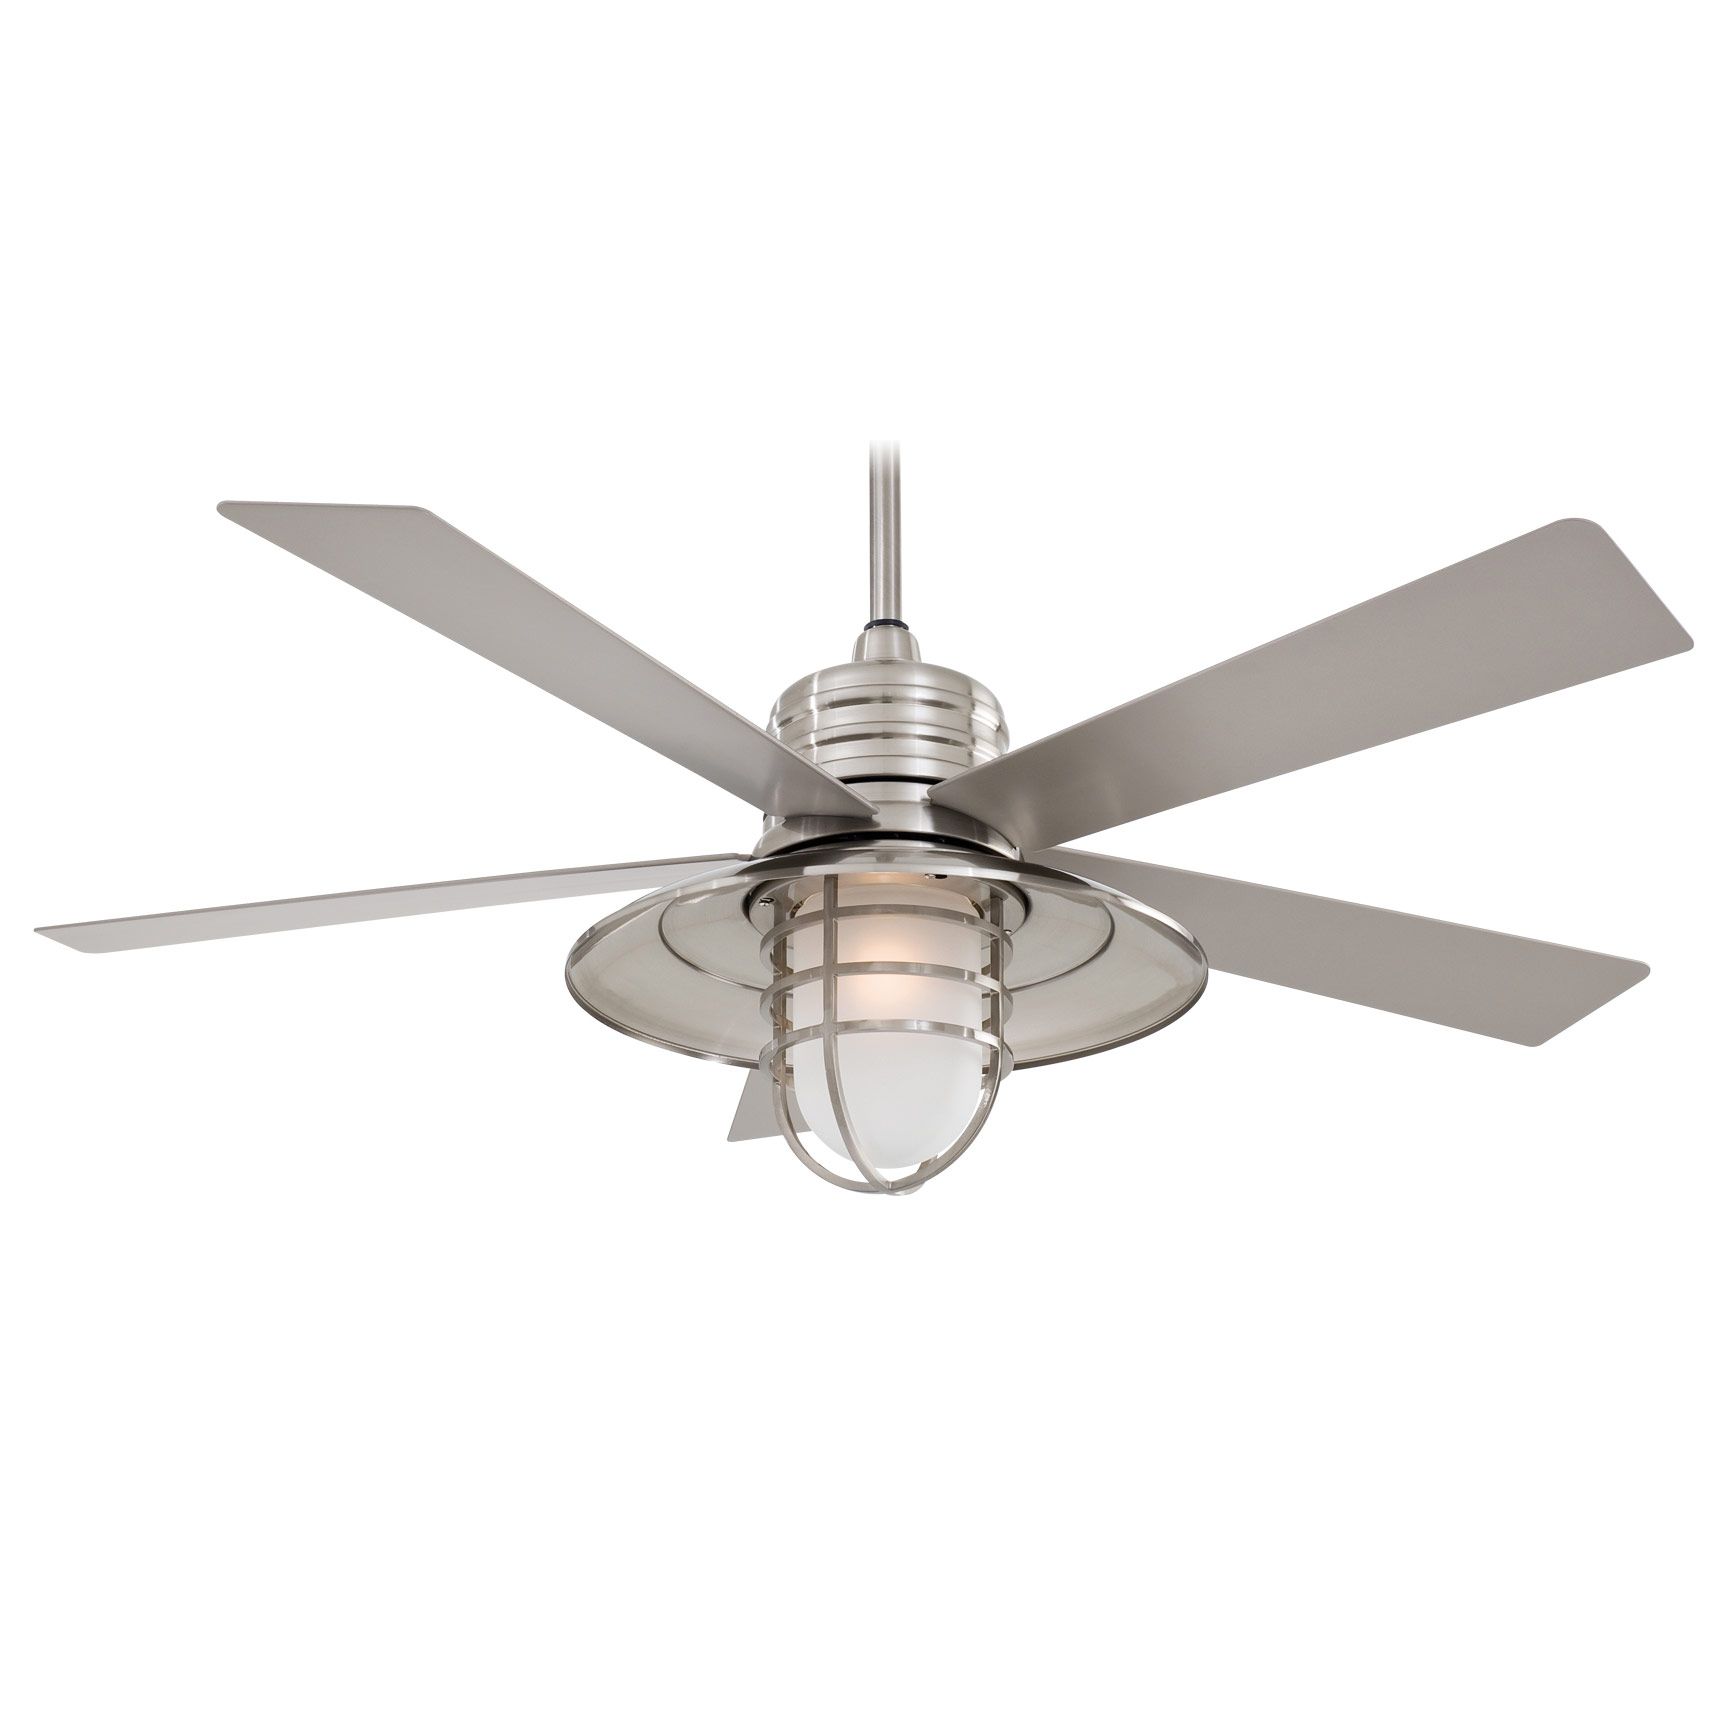 Rainman Indoor Outdoor Ceiling Fan With Light By Minka Aire F582l Bnw